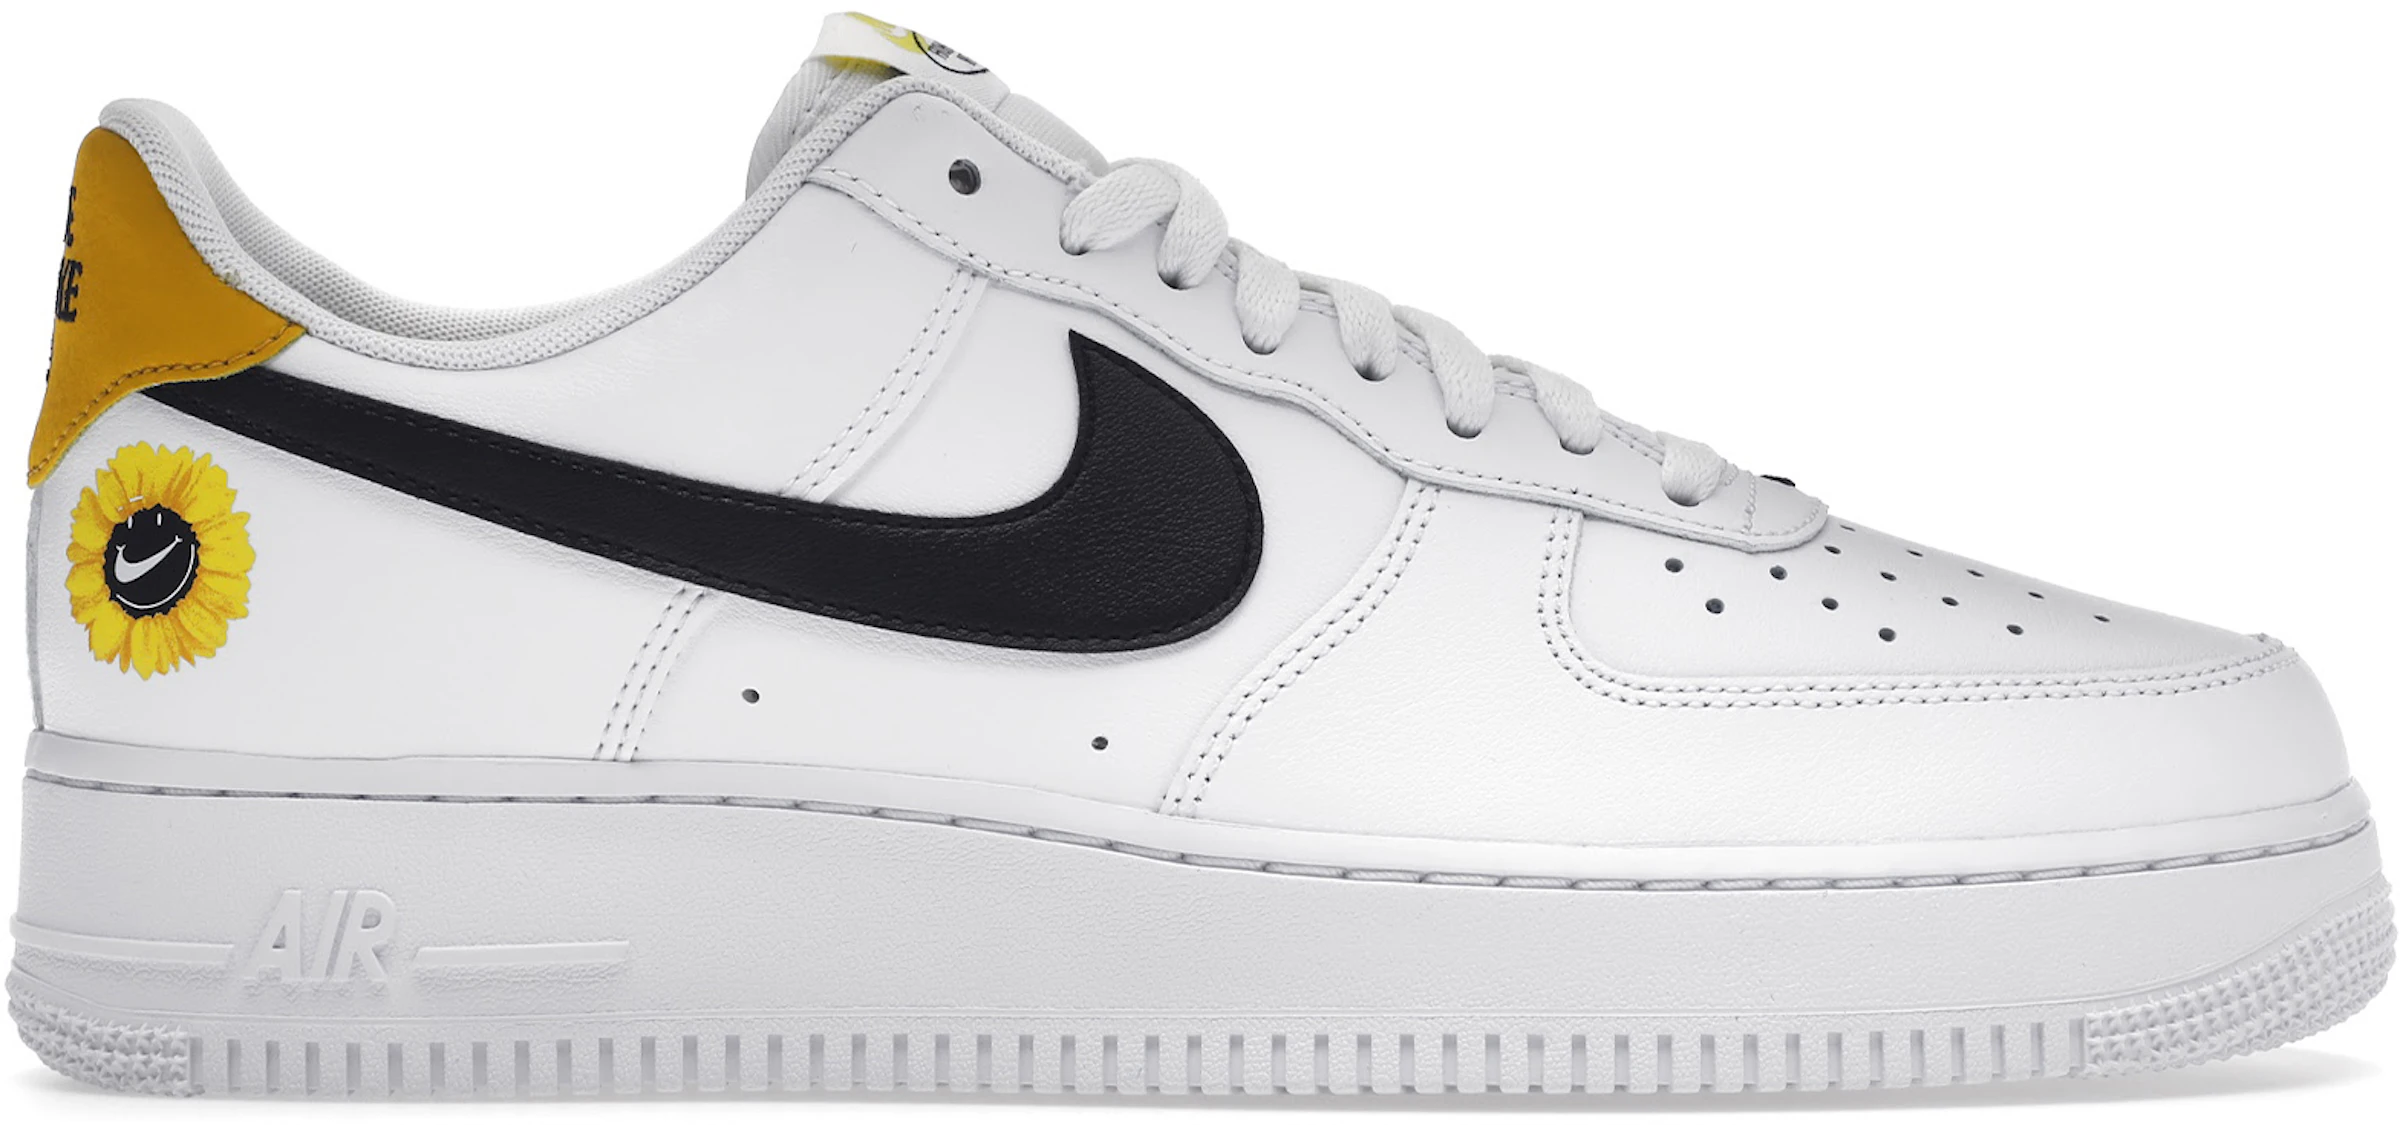 distancia baloncesto Inferior Nike Air Force 1 Low Have a Nike Day White Gold - DM0118-100 - ES